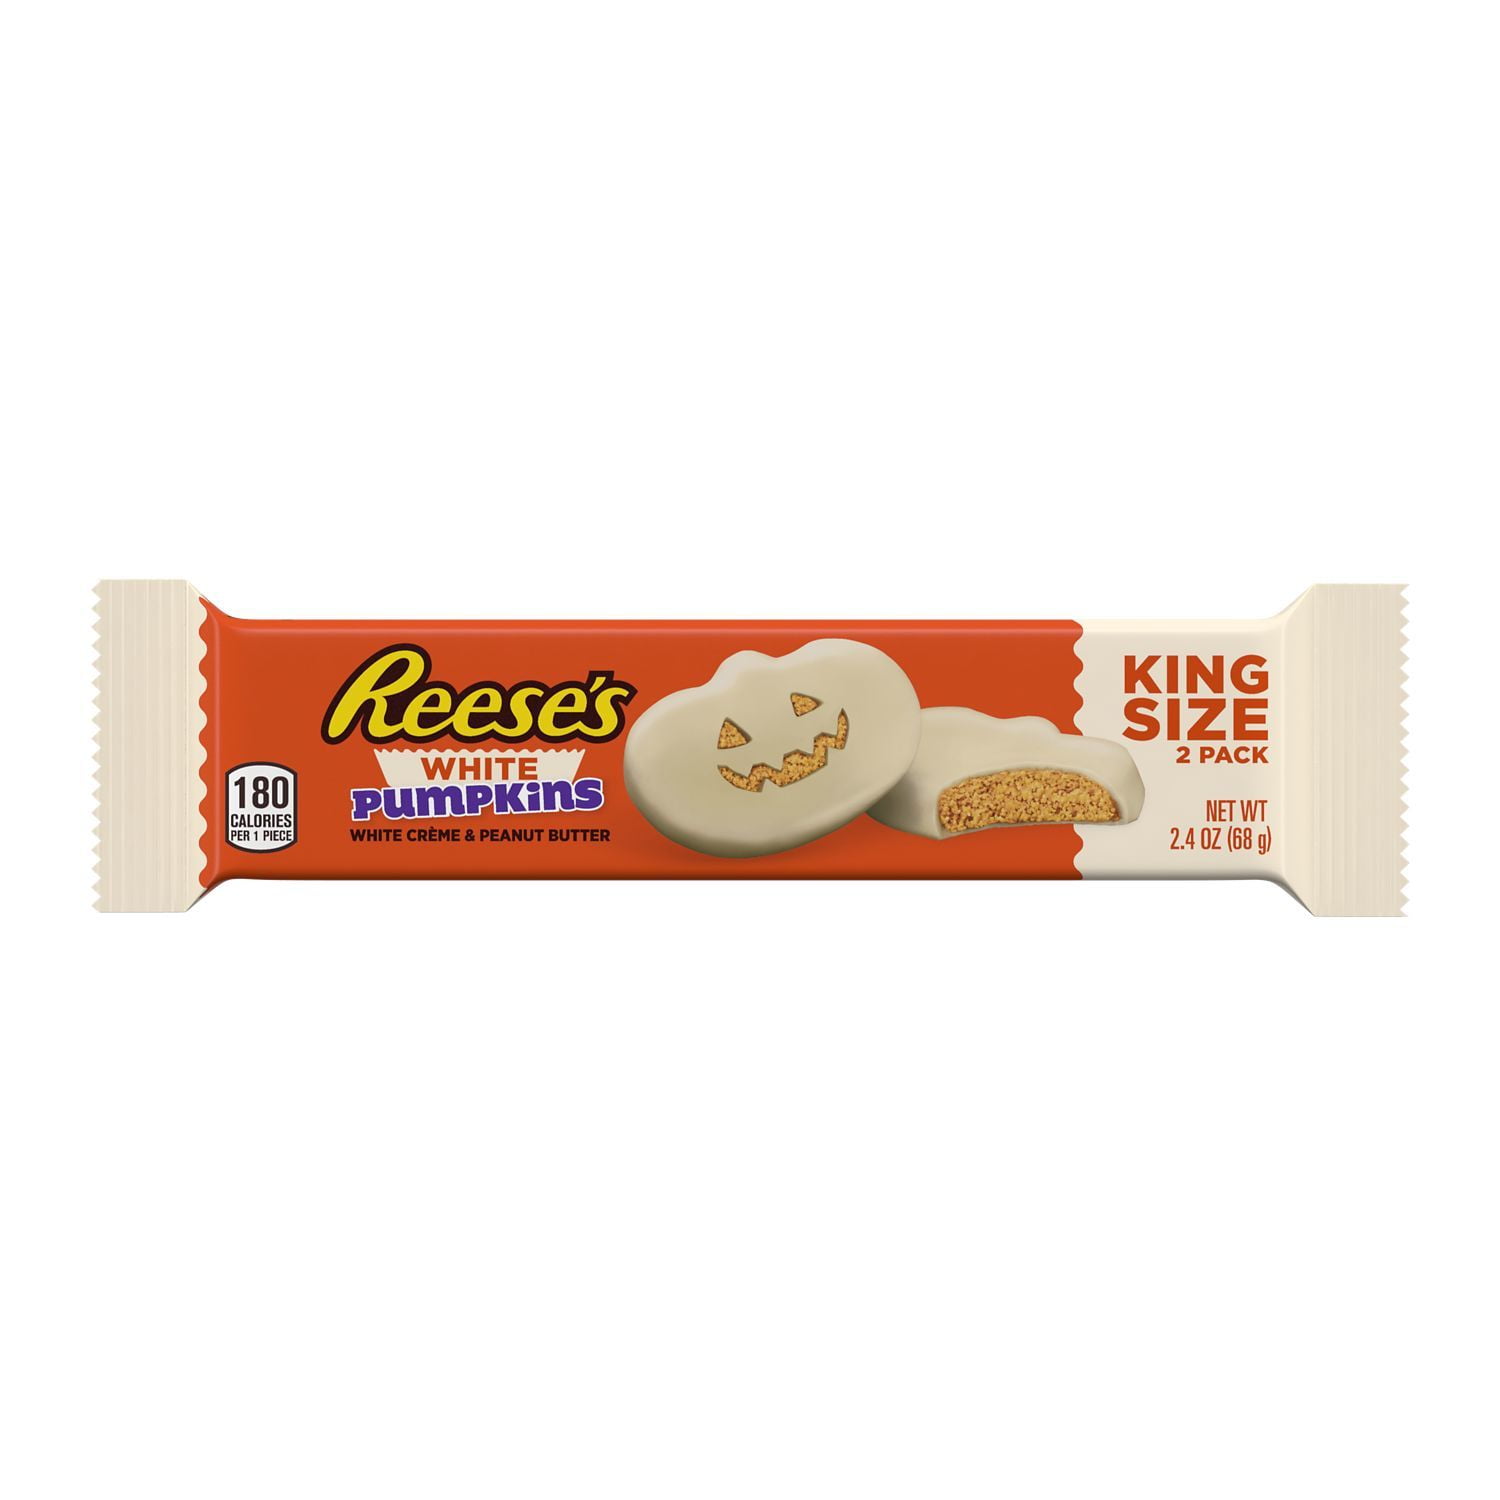 REESE'S, White Creme Peanut Butter Pumpkins Candy, Halloween, 2.4 oz, King Size Pack (2 Pieces)